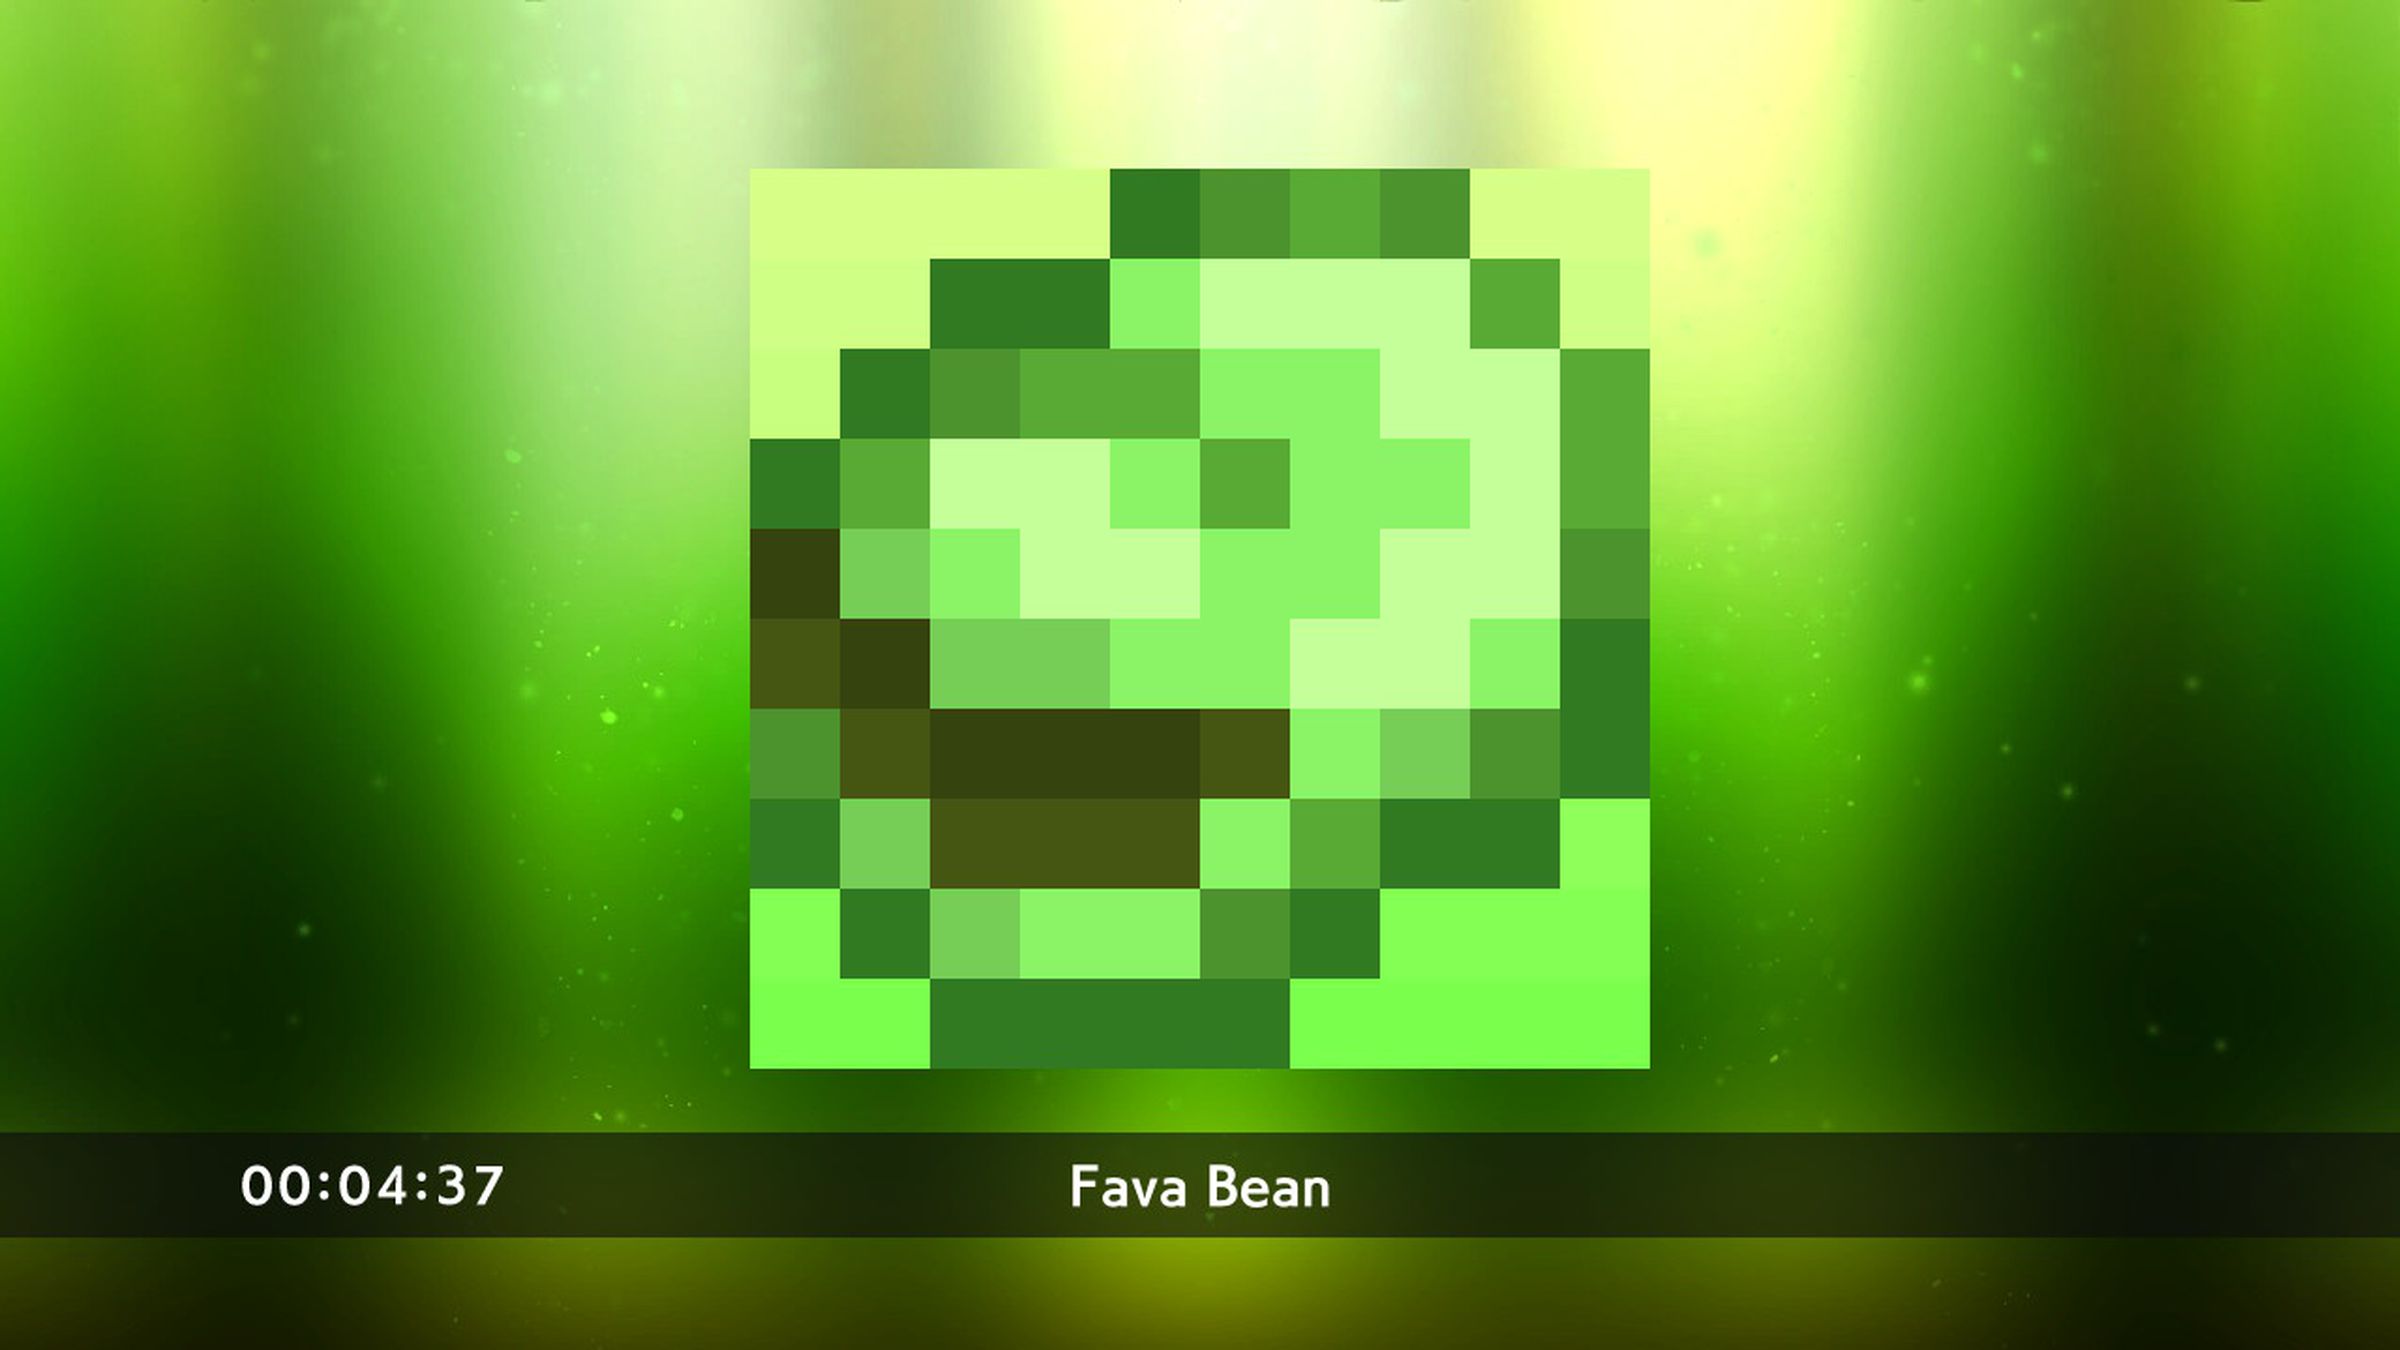 Fava bean puzzle from Picross S3